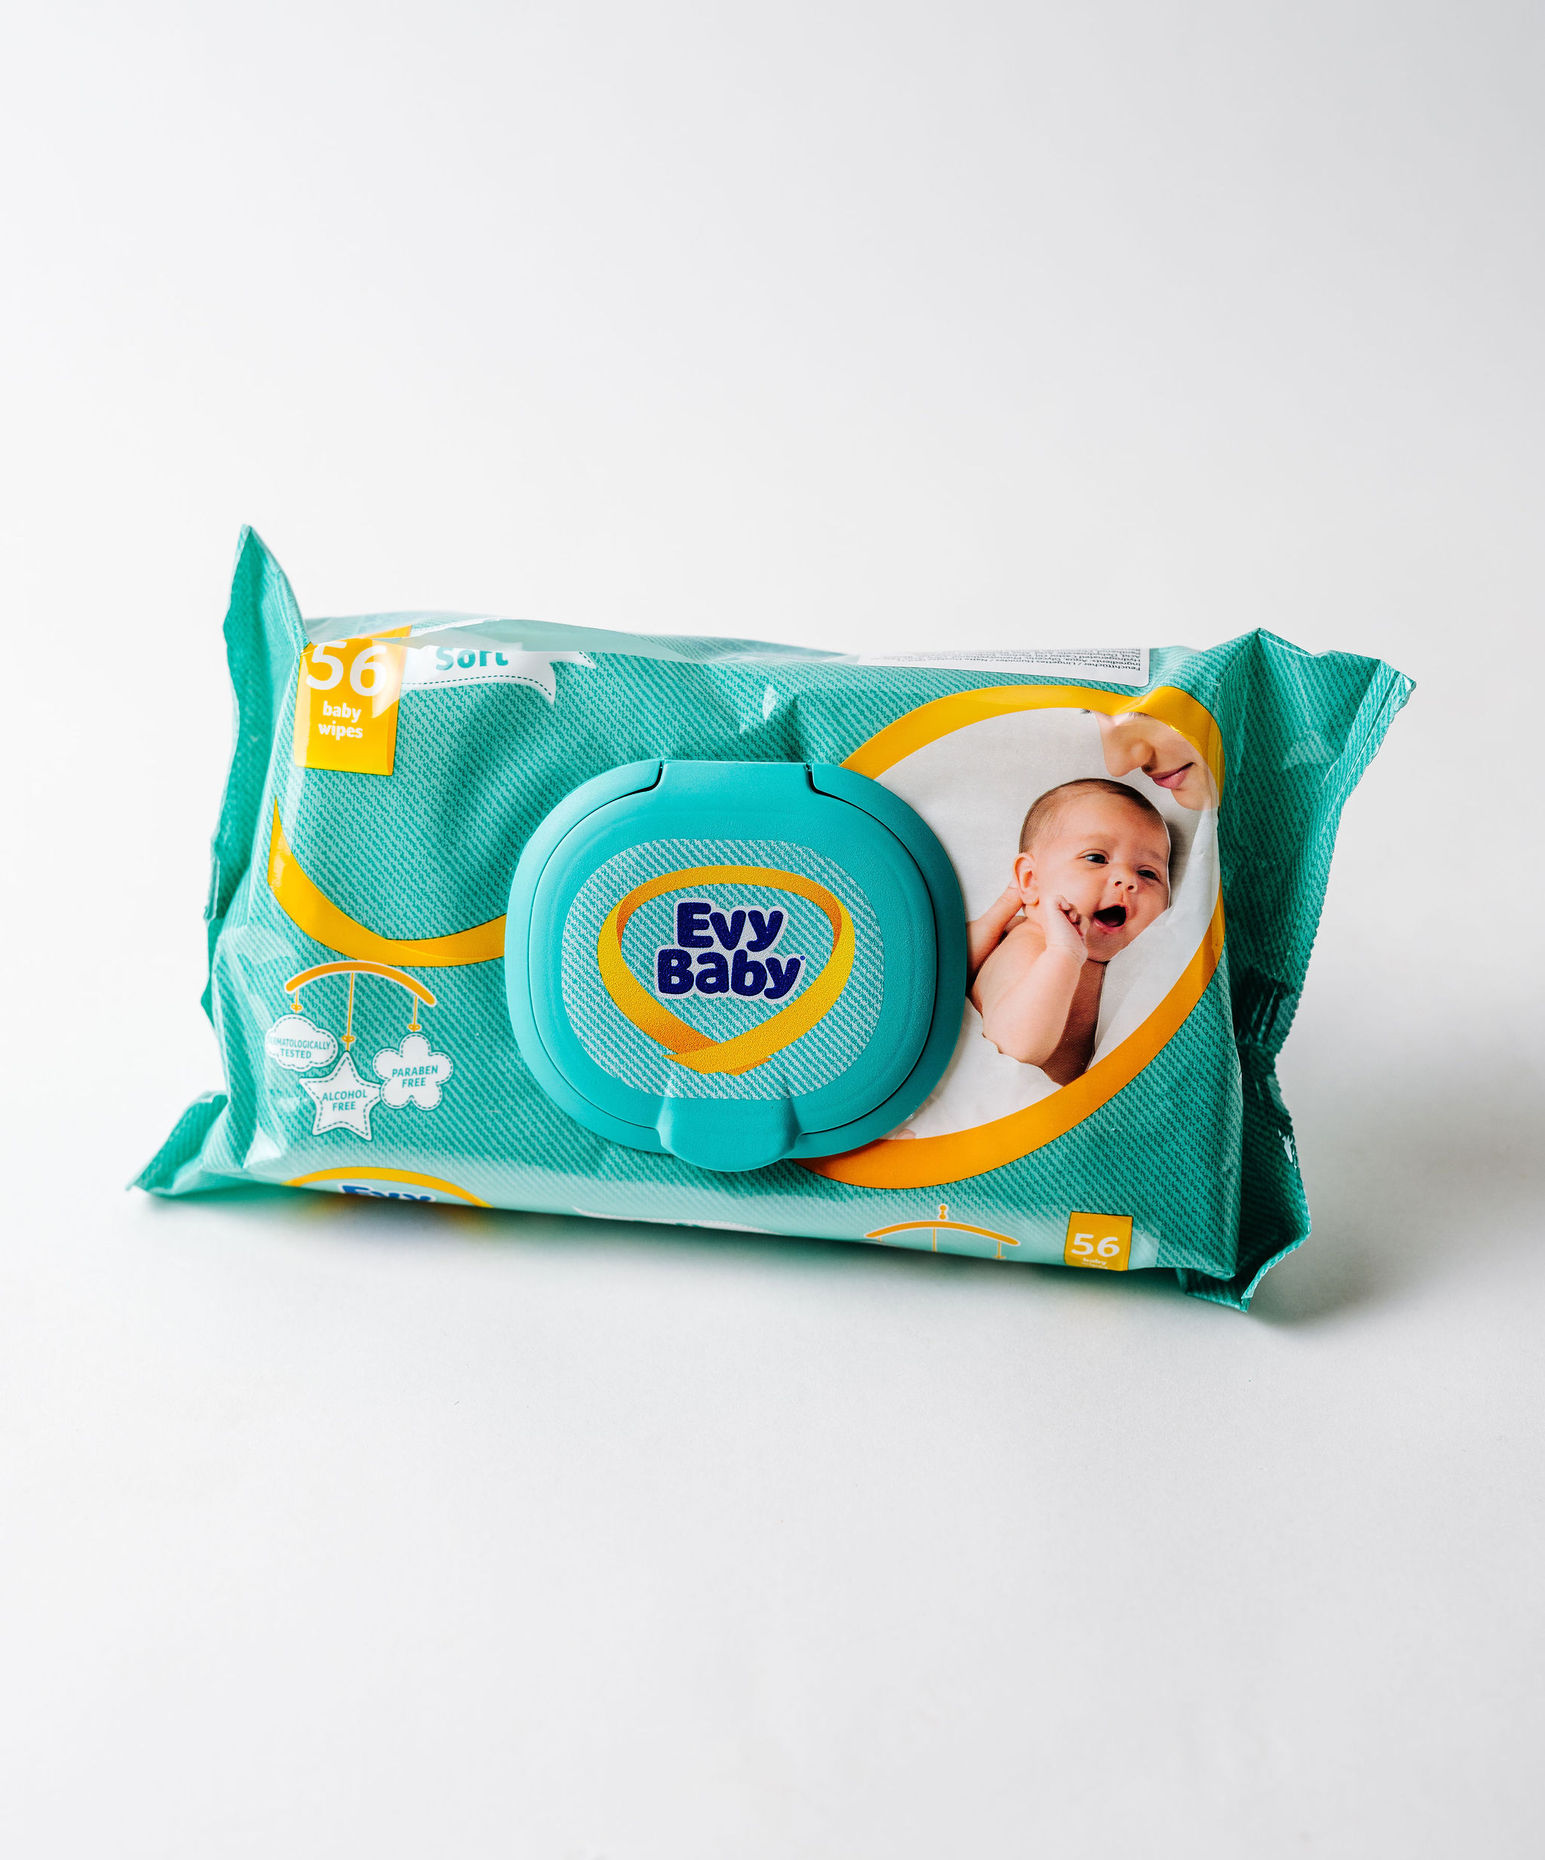 Evy Baby Soft Wet Baby Wipes